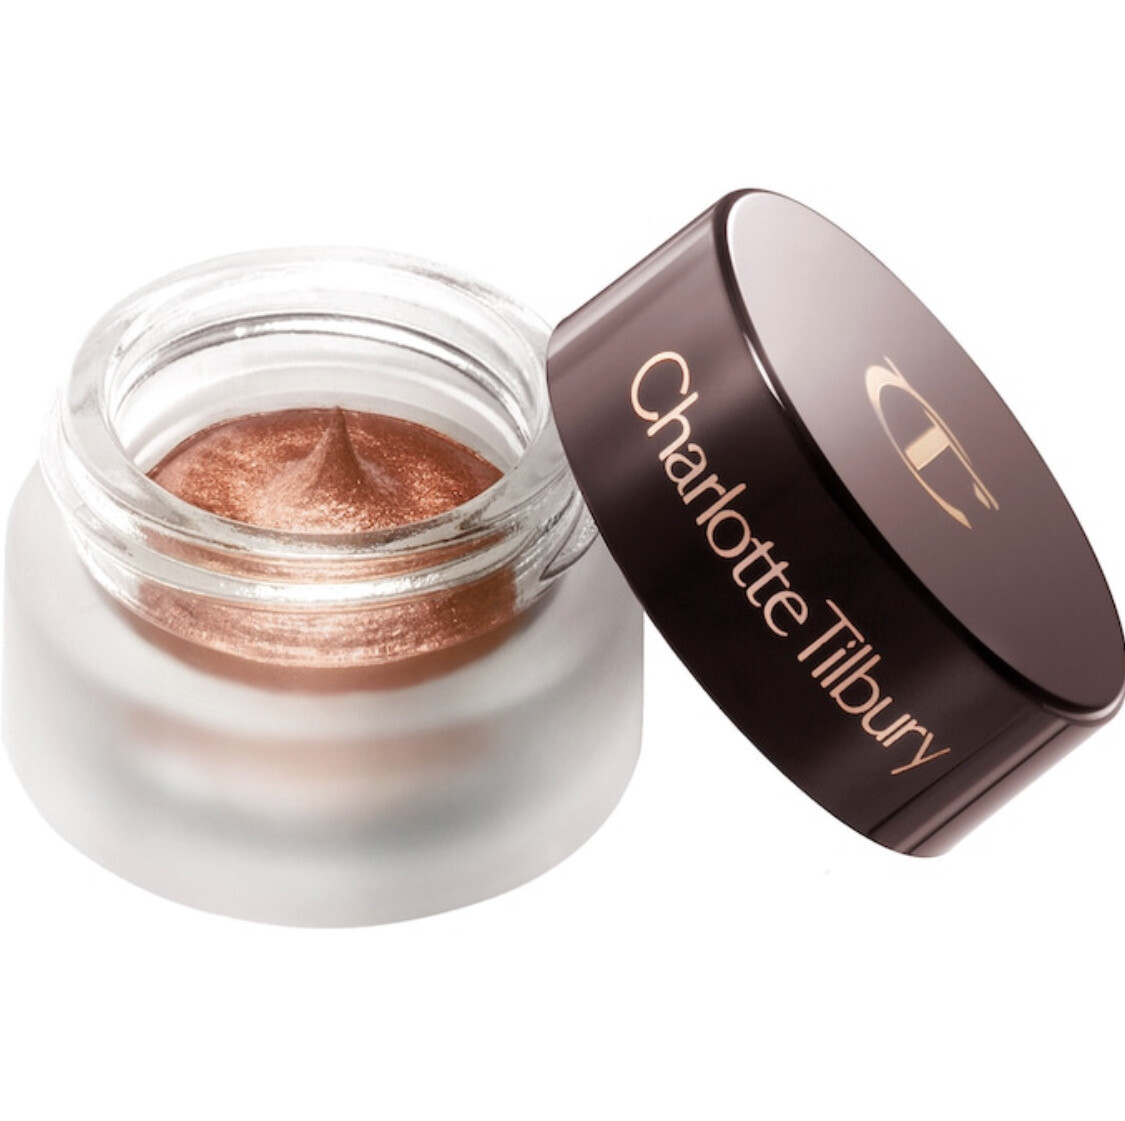 Charlotte Tilbury - Eyes To Mesmerize Cream Eyeshadow | Walk of No Shame - russet-rose with golden-peach sparkle